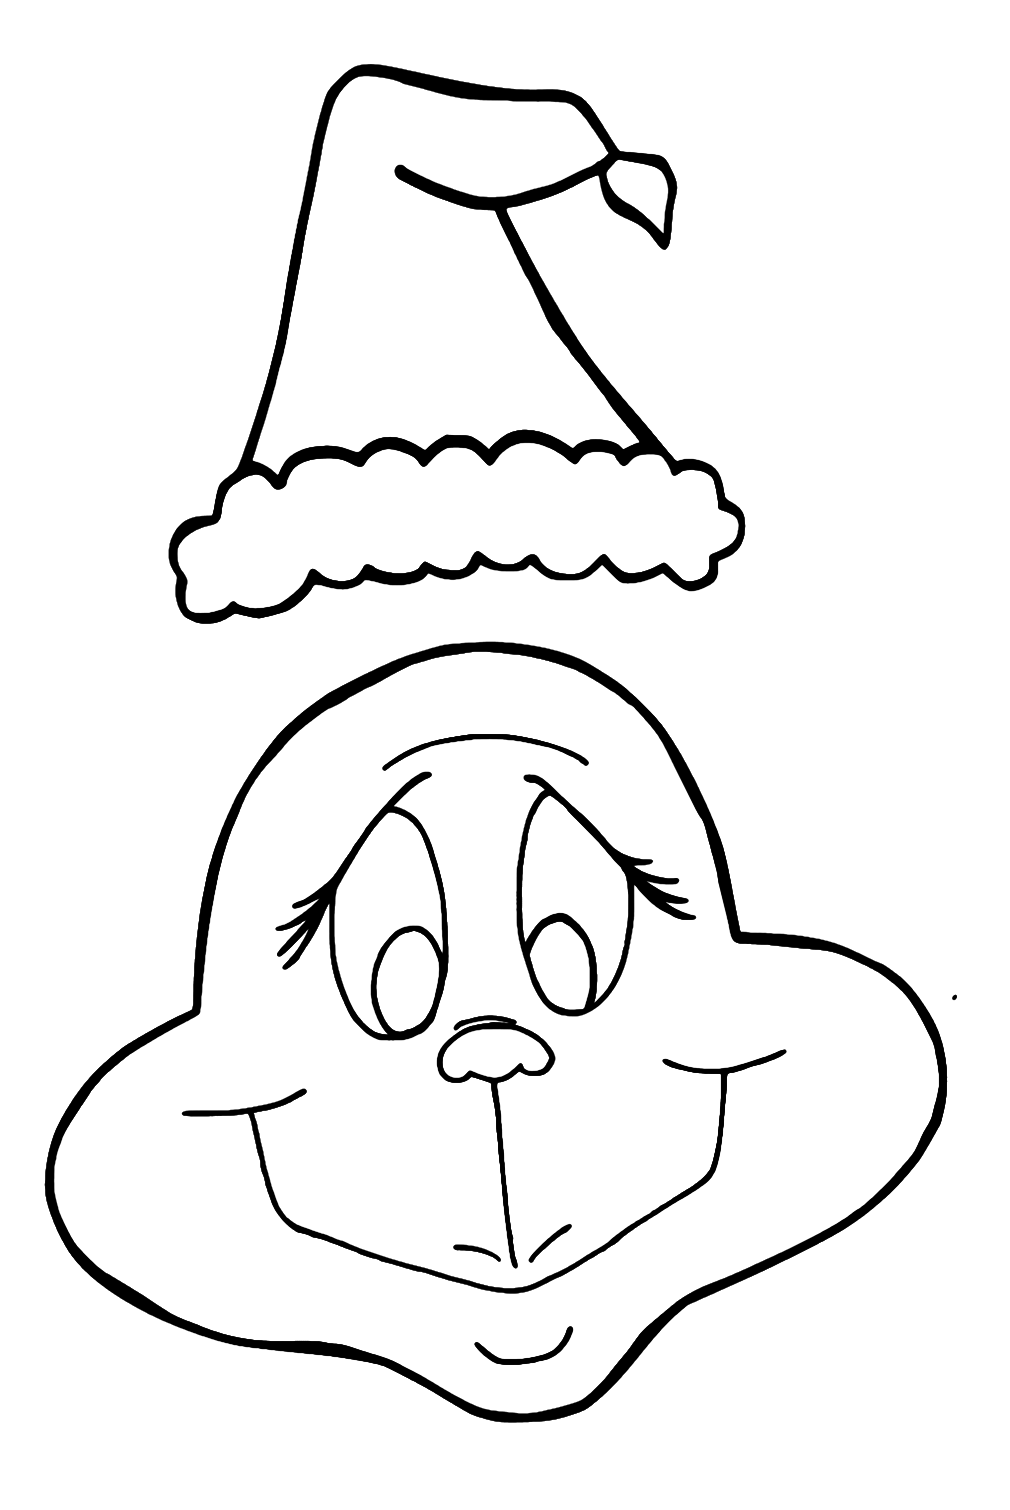 The Grinch And Christmas Hat Coloring Pages